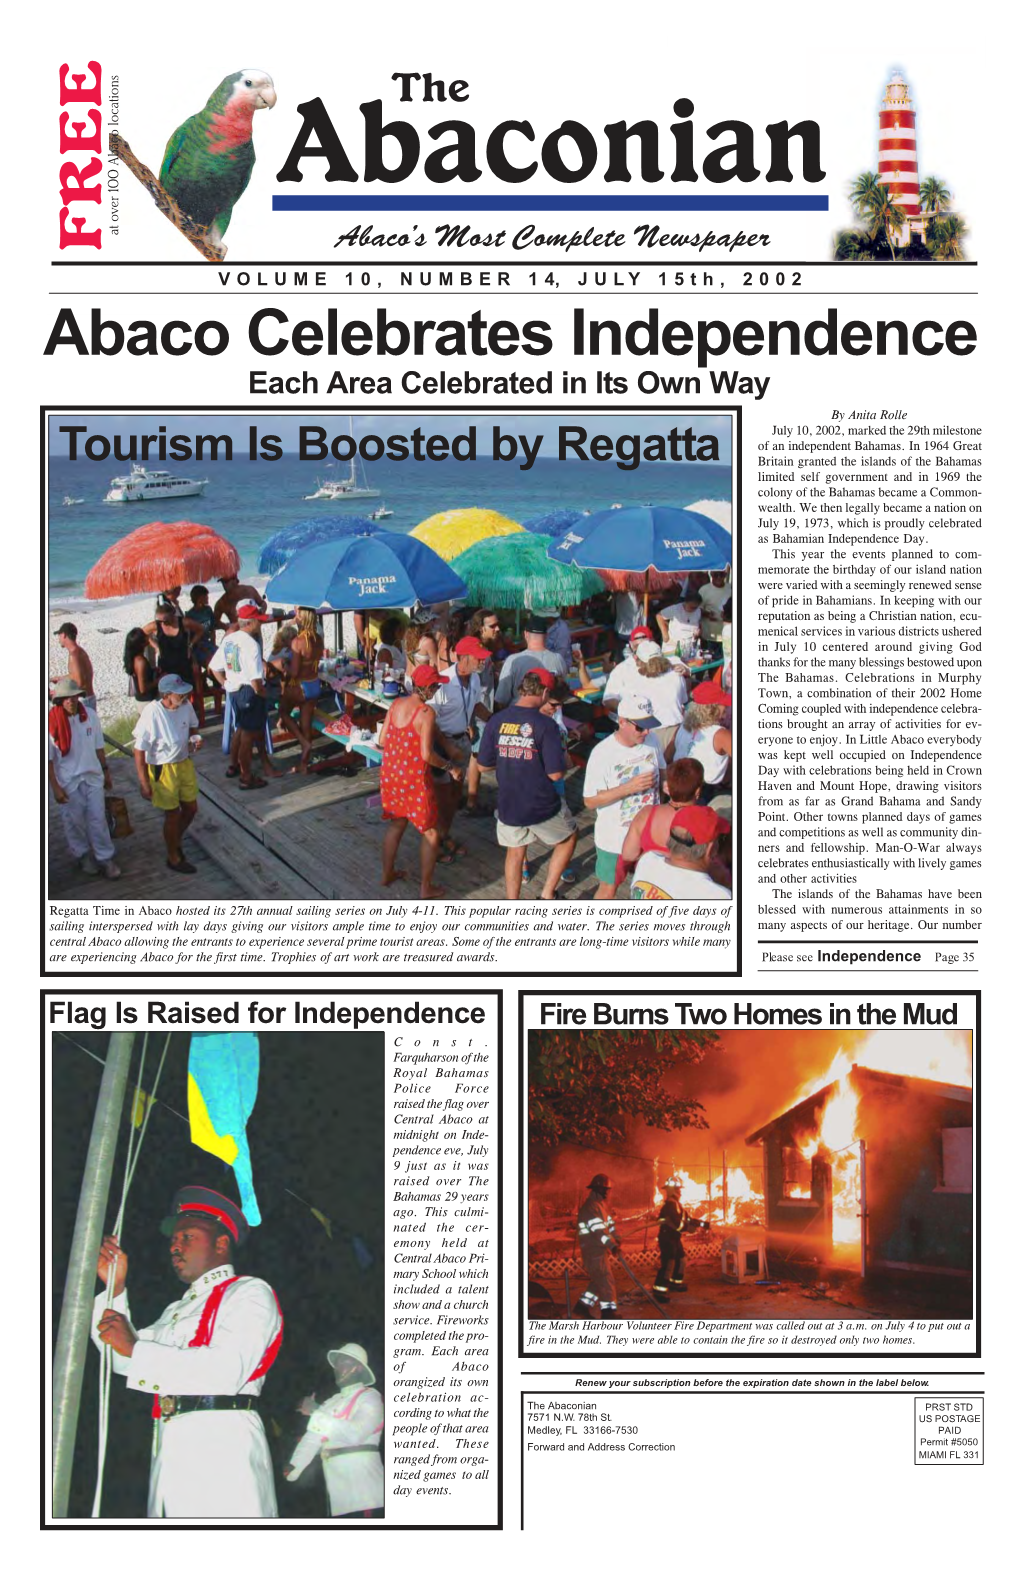 Abaco Celebrates Independence Each Area Celebrated in Its Own Way by Anita Rolle July 10, 2002, Marked the 29Th Milestone of an Independent Bahamas